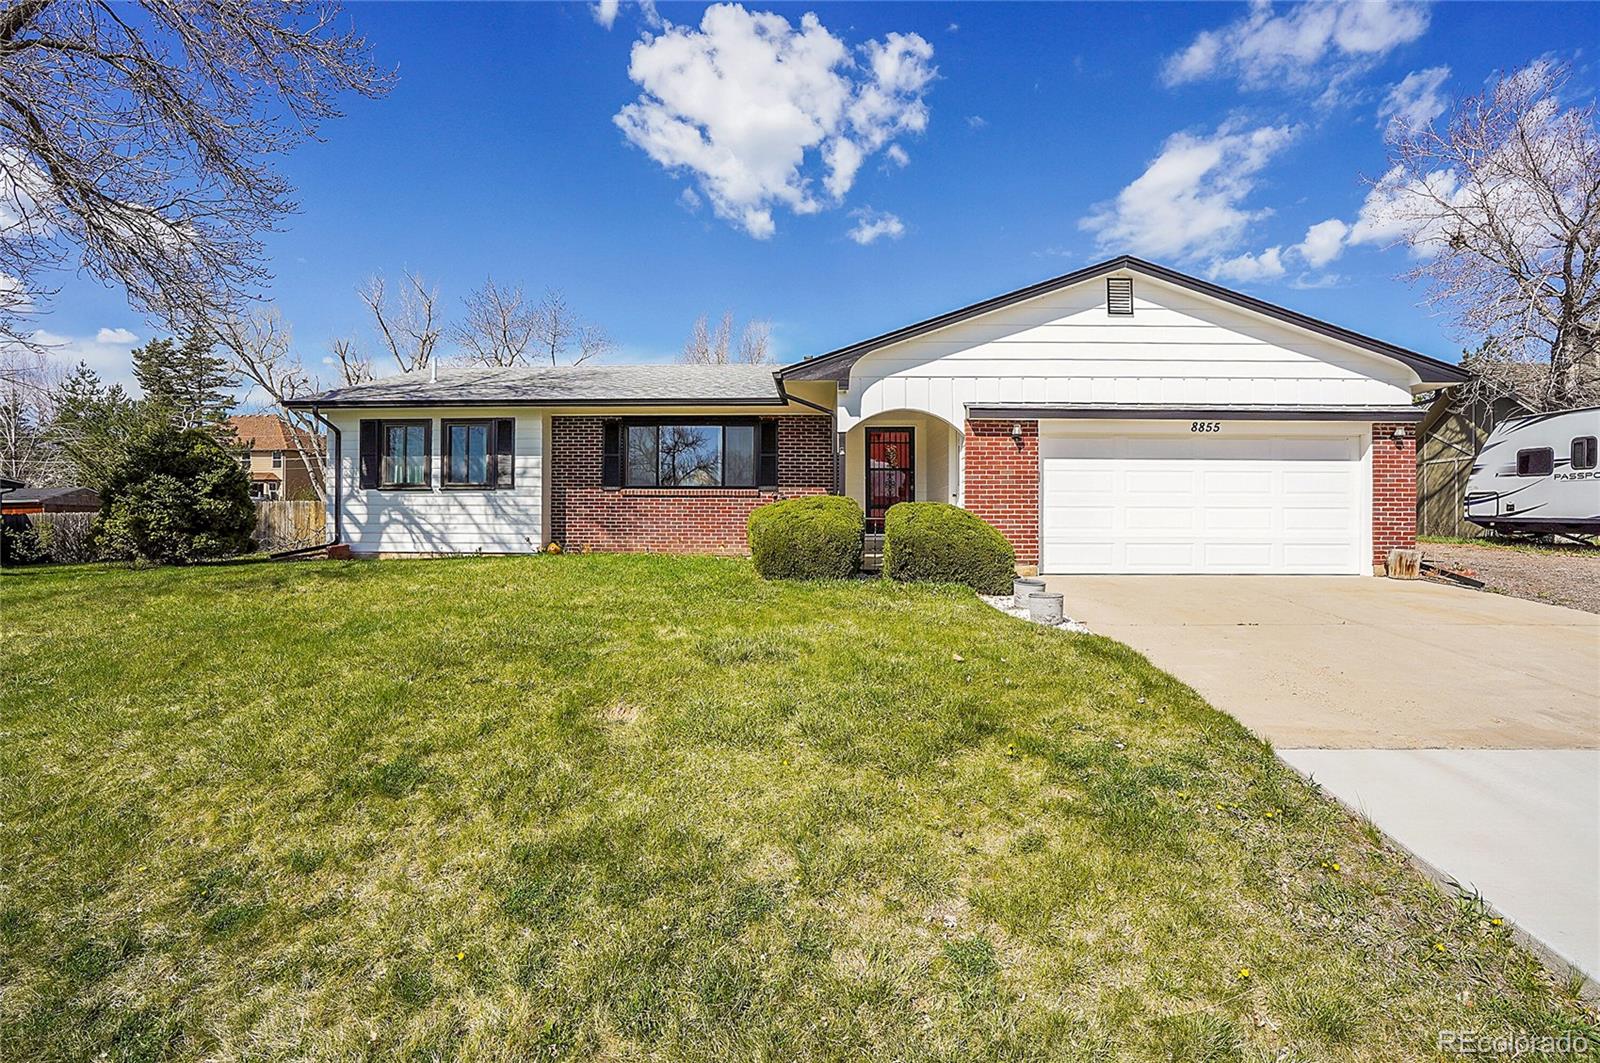 8855 s brentwood street, littleton sold home. Closed on 2024-05-17 for $628,000.